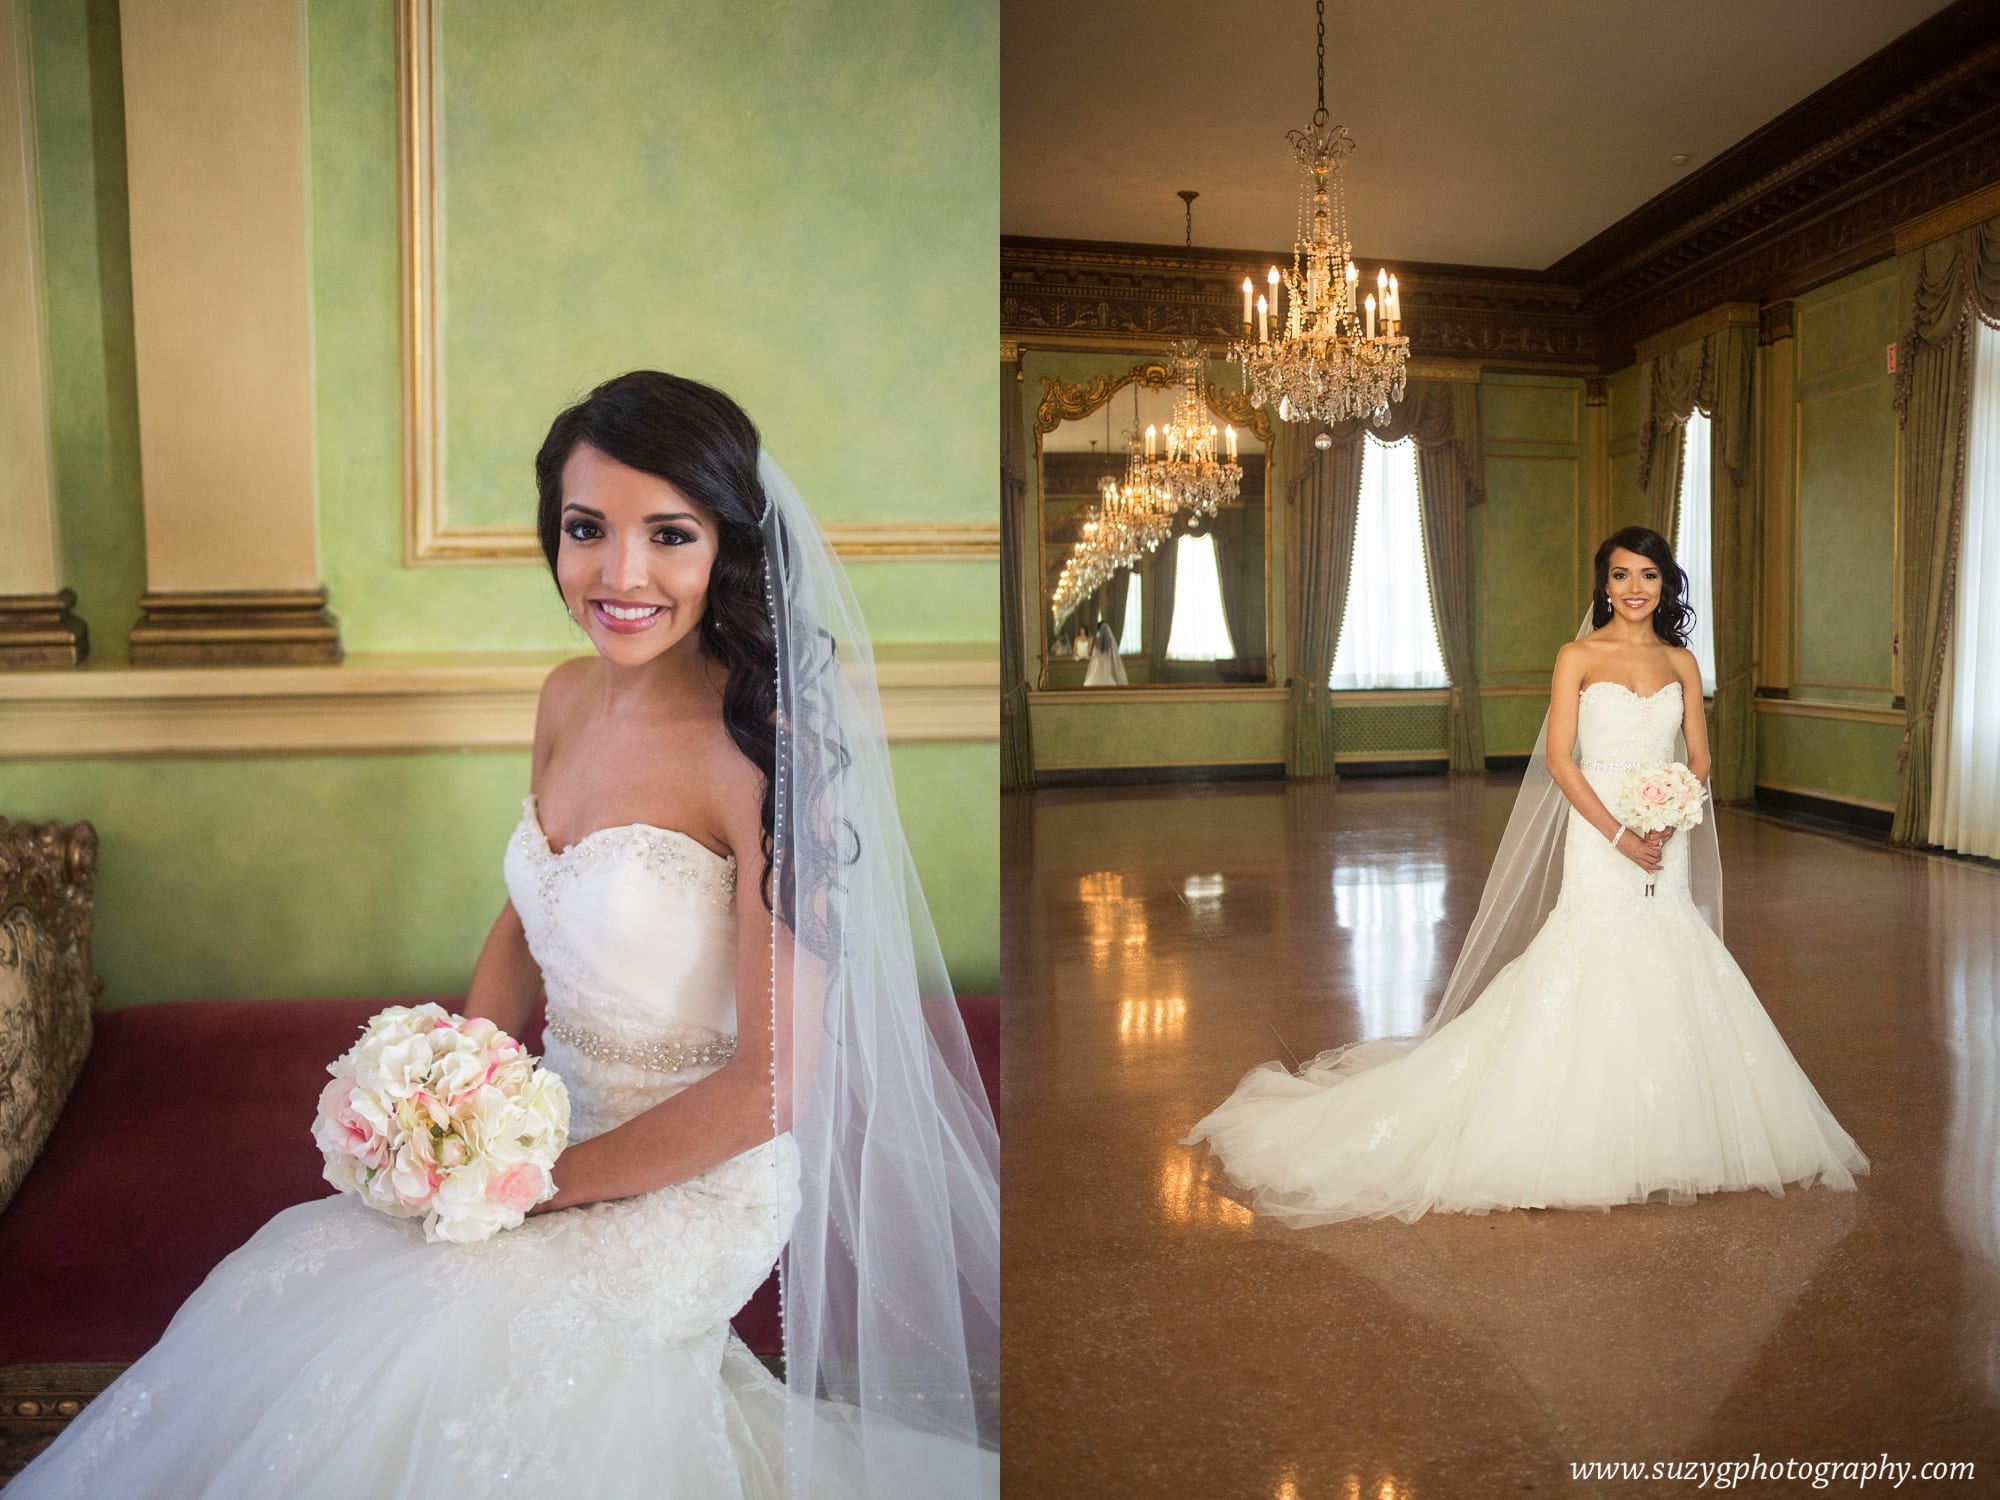 bridals-baton-rouge-old governors mansion-suzyg-suzy-g-photography-weddings-wedding photography_0007